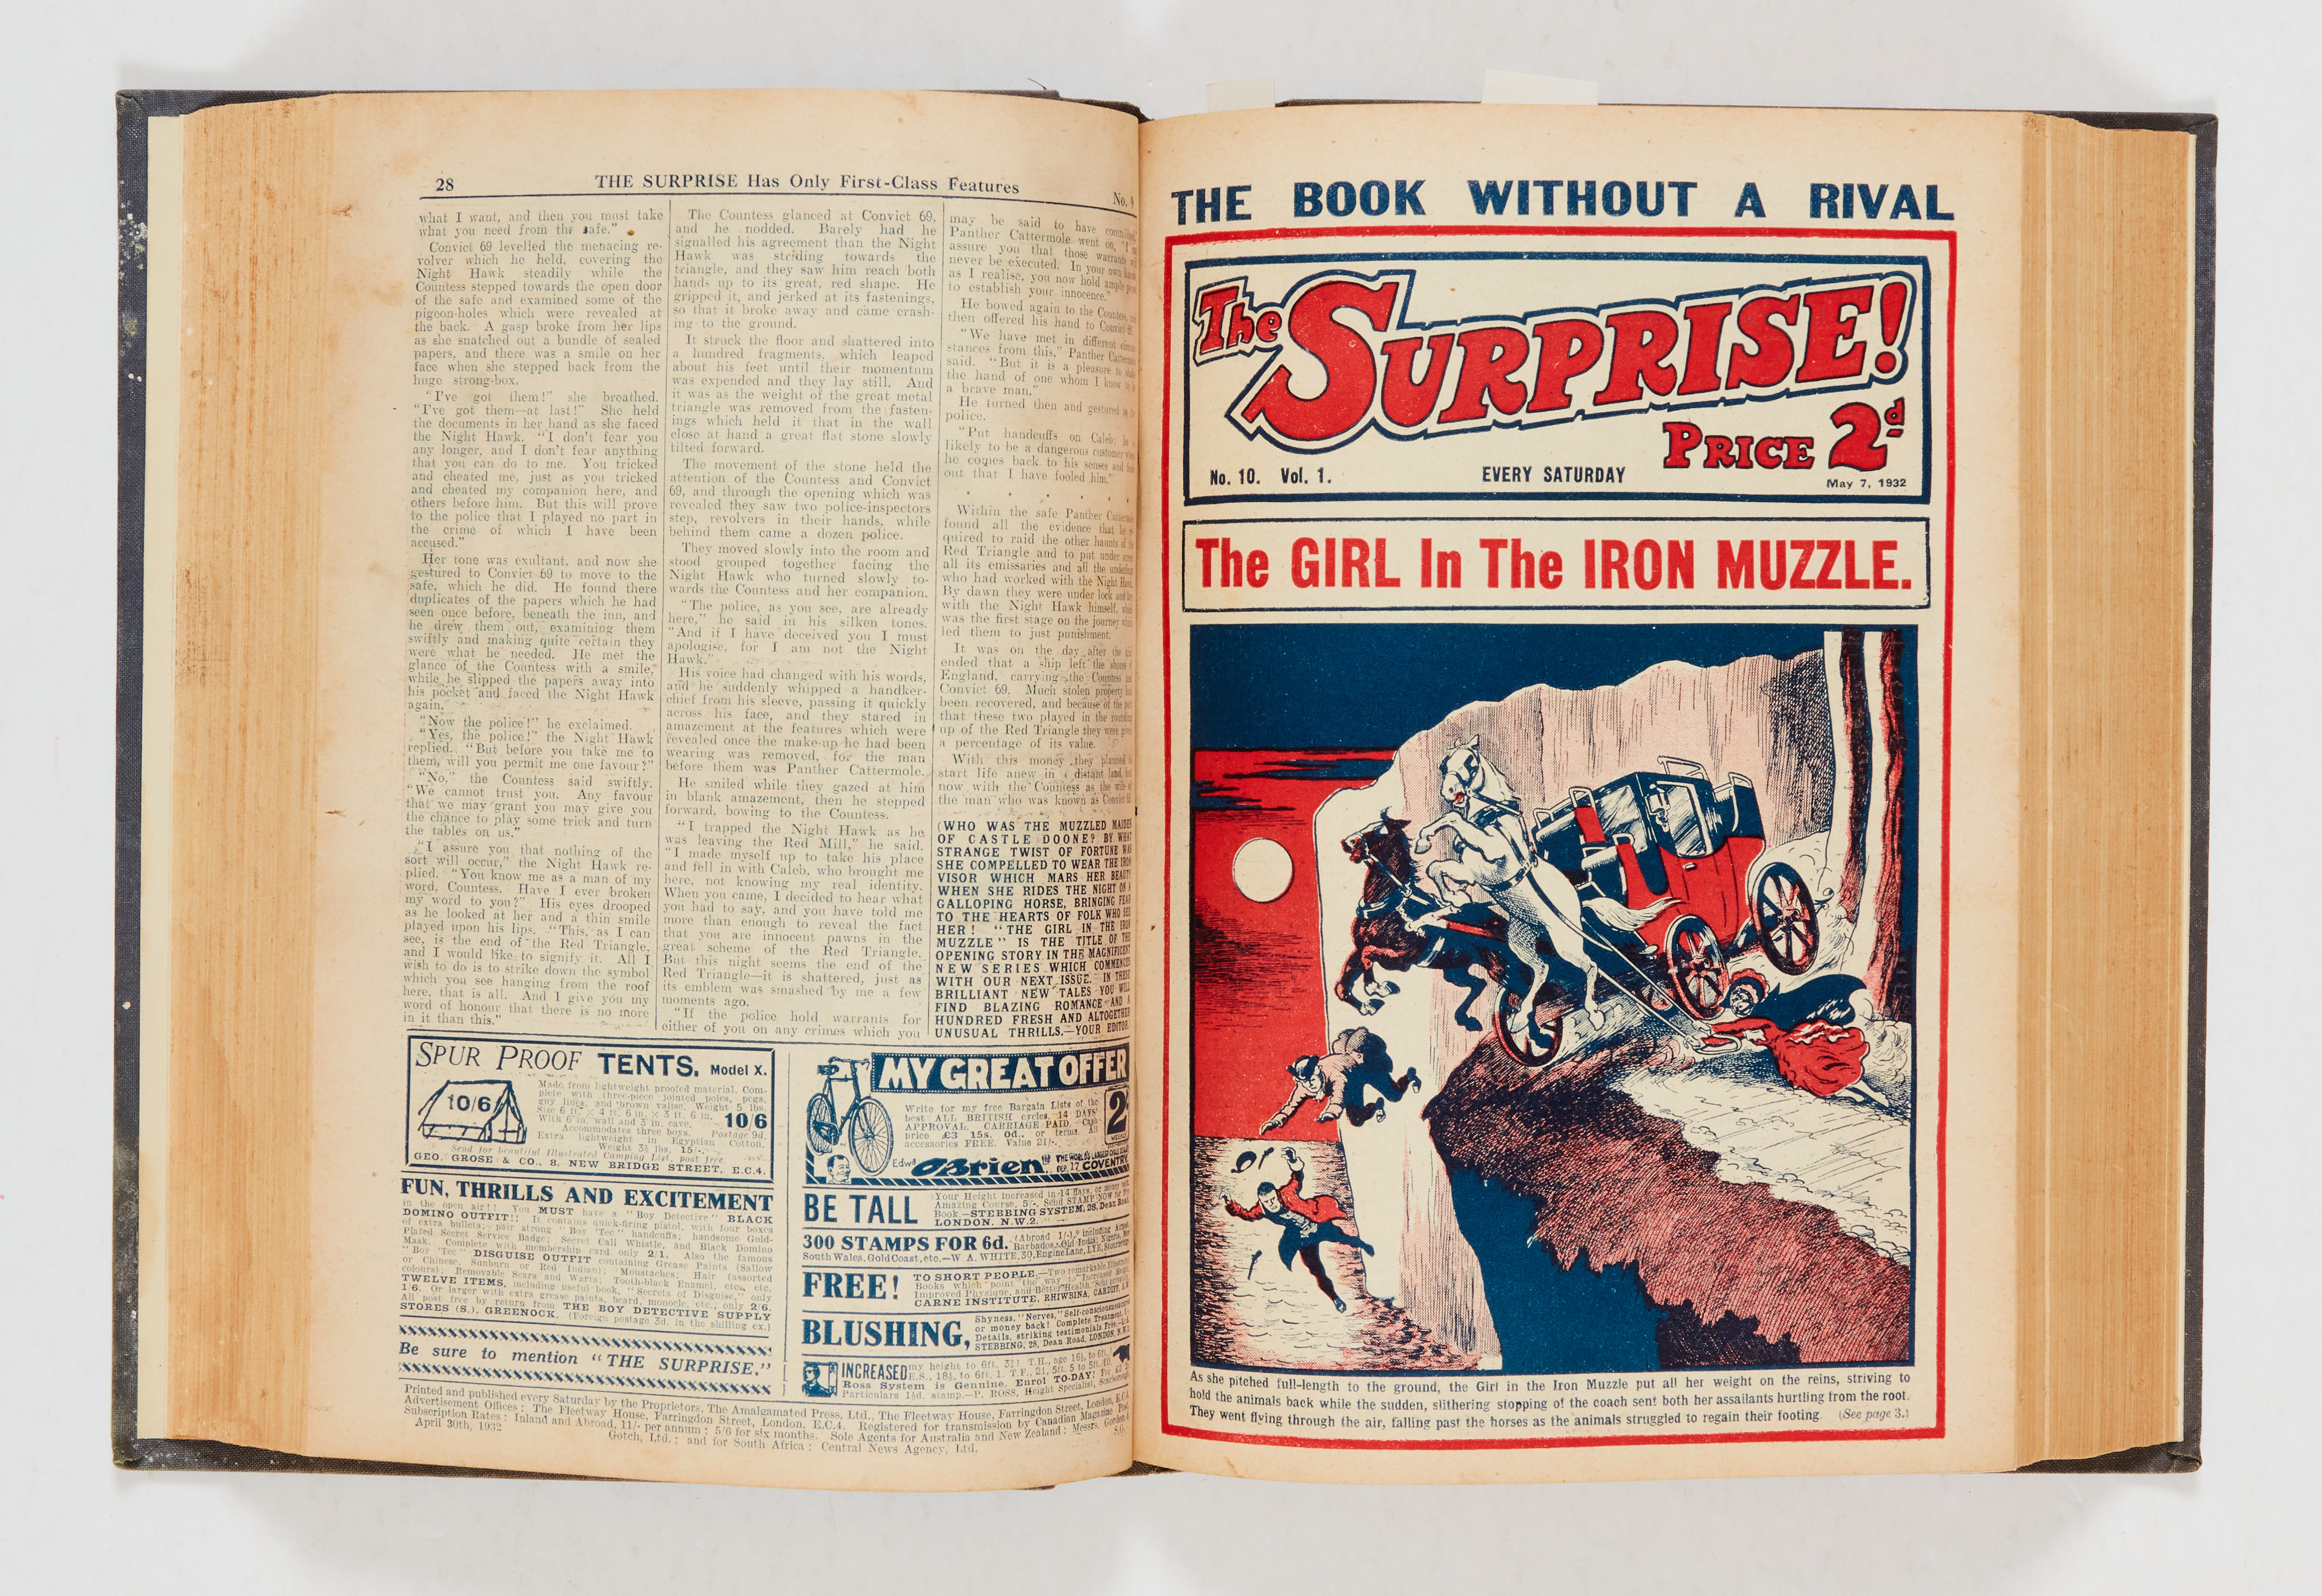 The Surprise (1932) 1-26 in bound volume. Starring The Phantom Thief, The Ace of 'Tecs and When